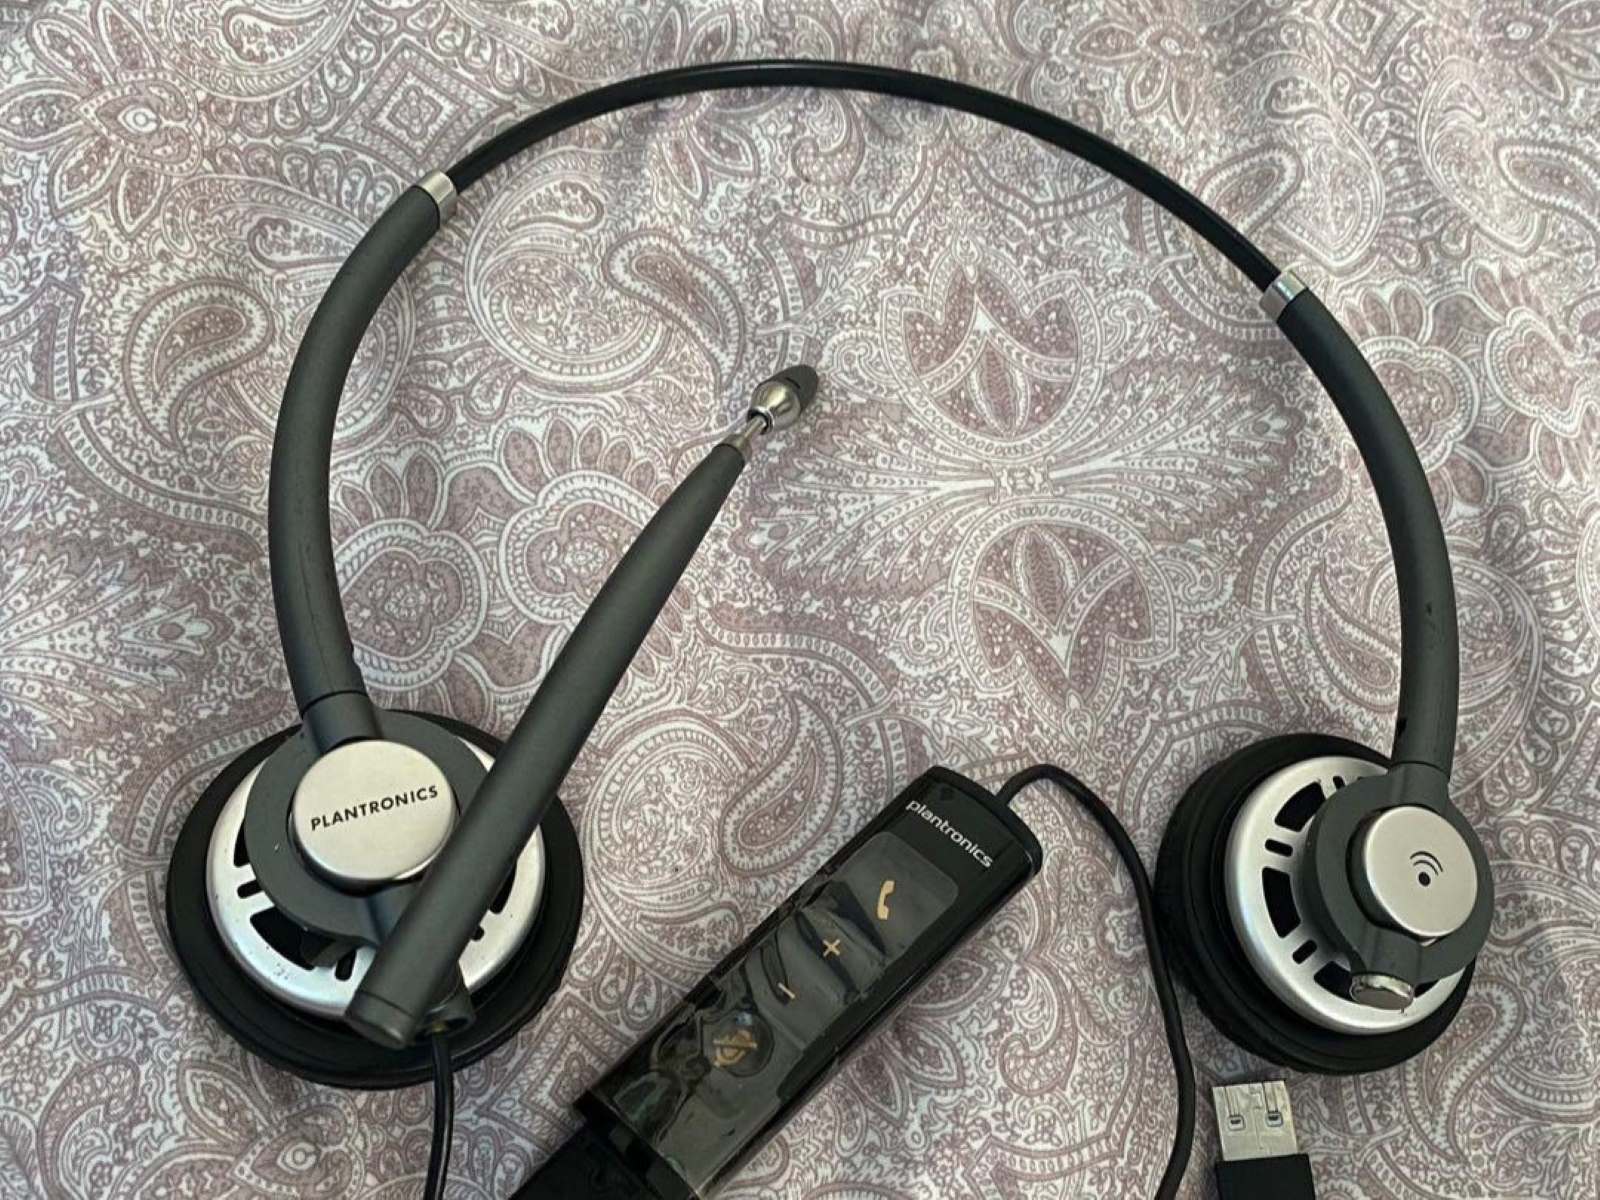 Plantronics Headset Beeping Woes: Troubleshooting And Fixes